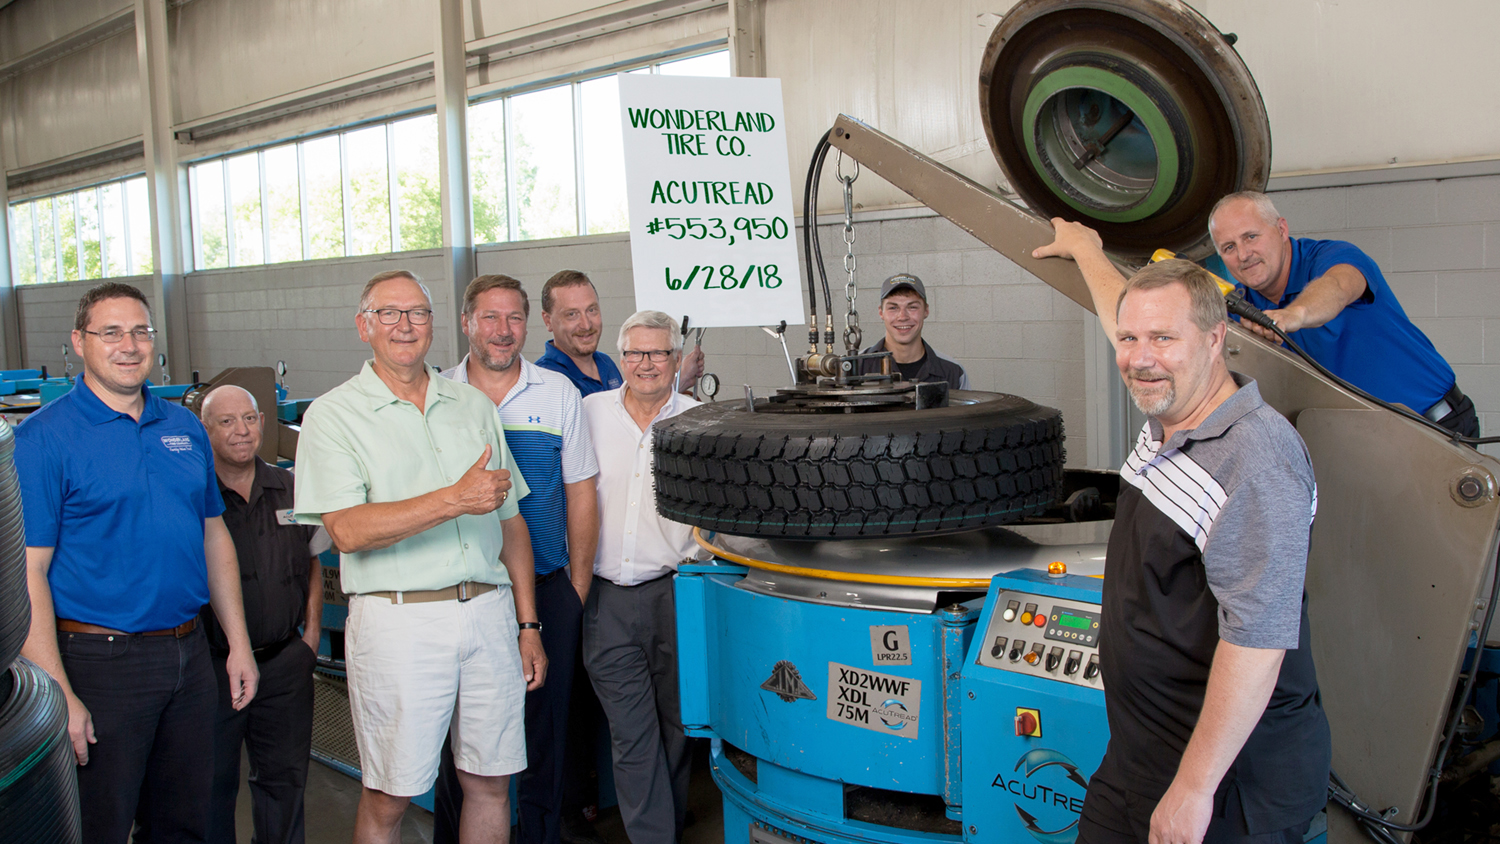 Wonderland Tire celebrated the production of their 553,950th AcuTread Tire on June 28, 2018.